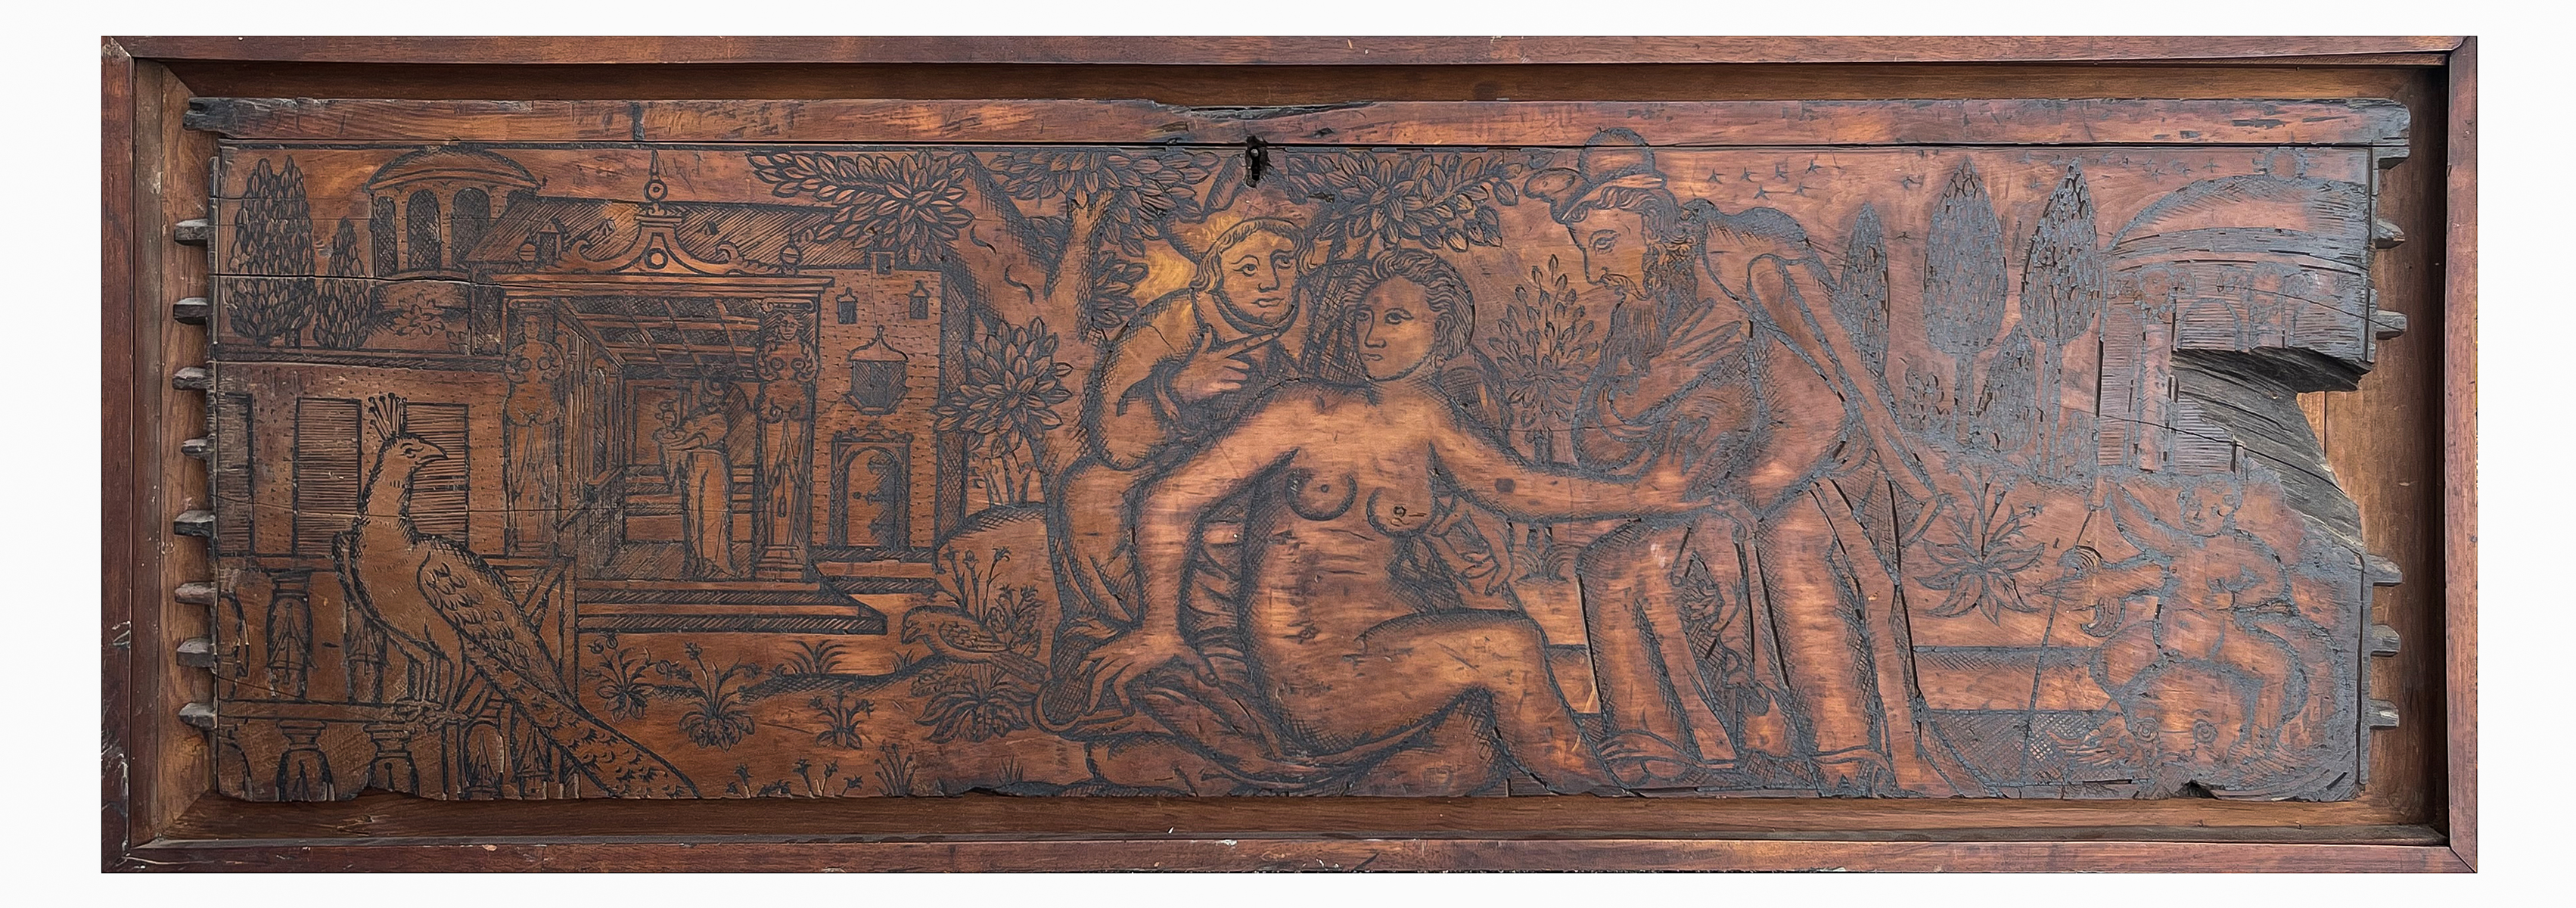 RELIEF CARVED WOOD PANEL FROM CASONNE